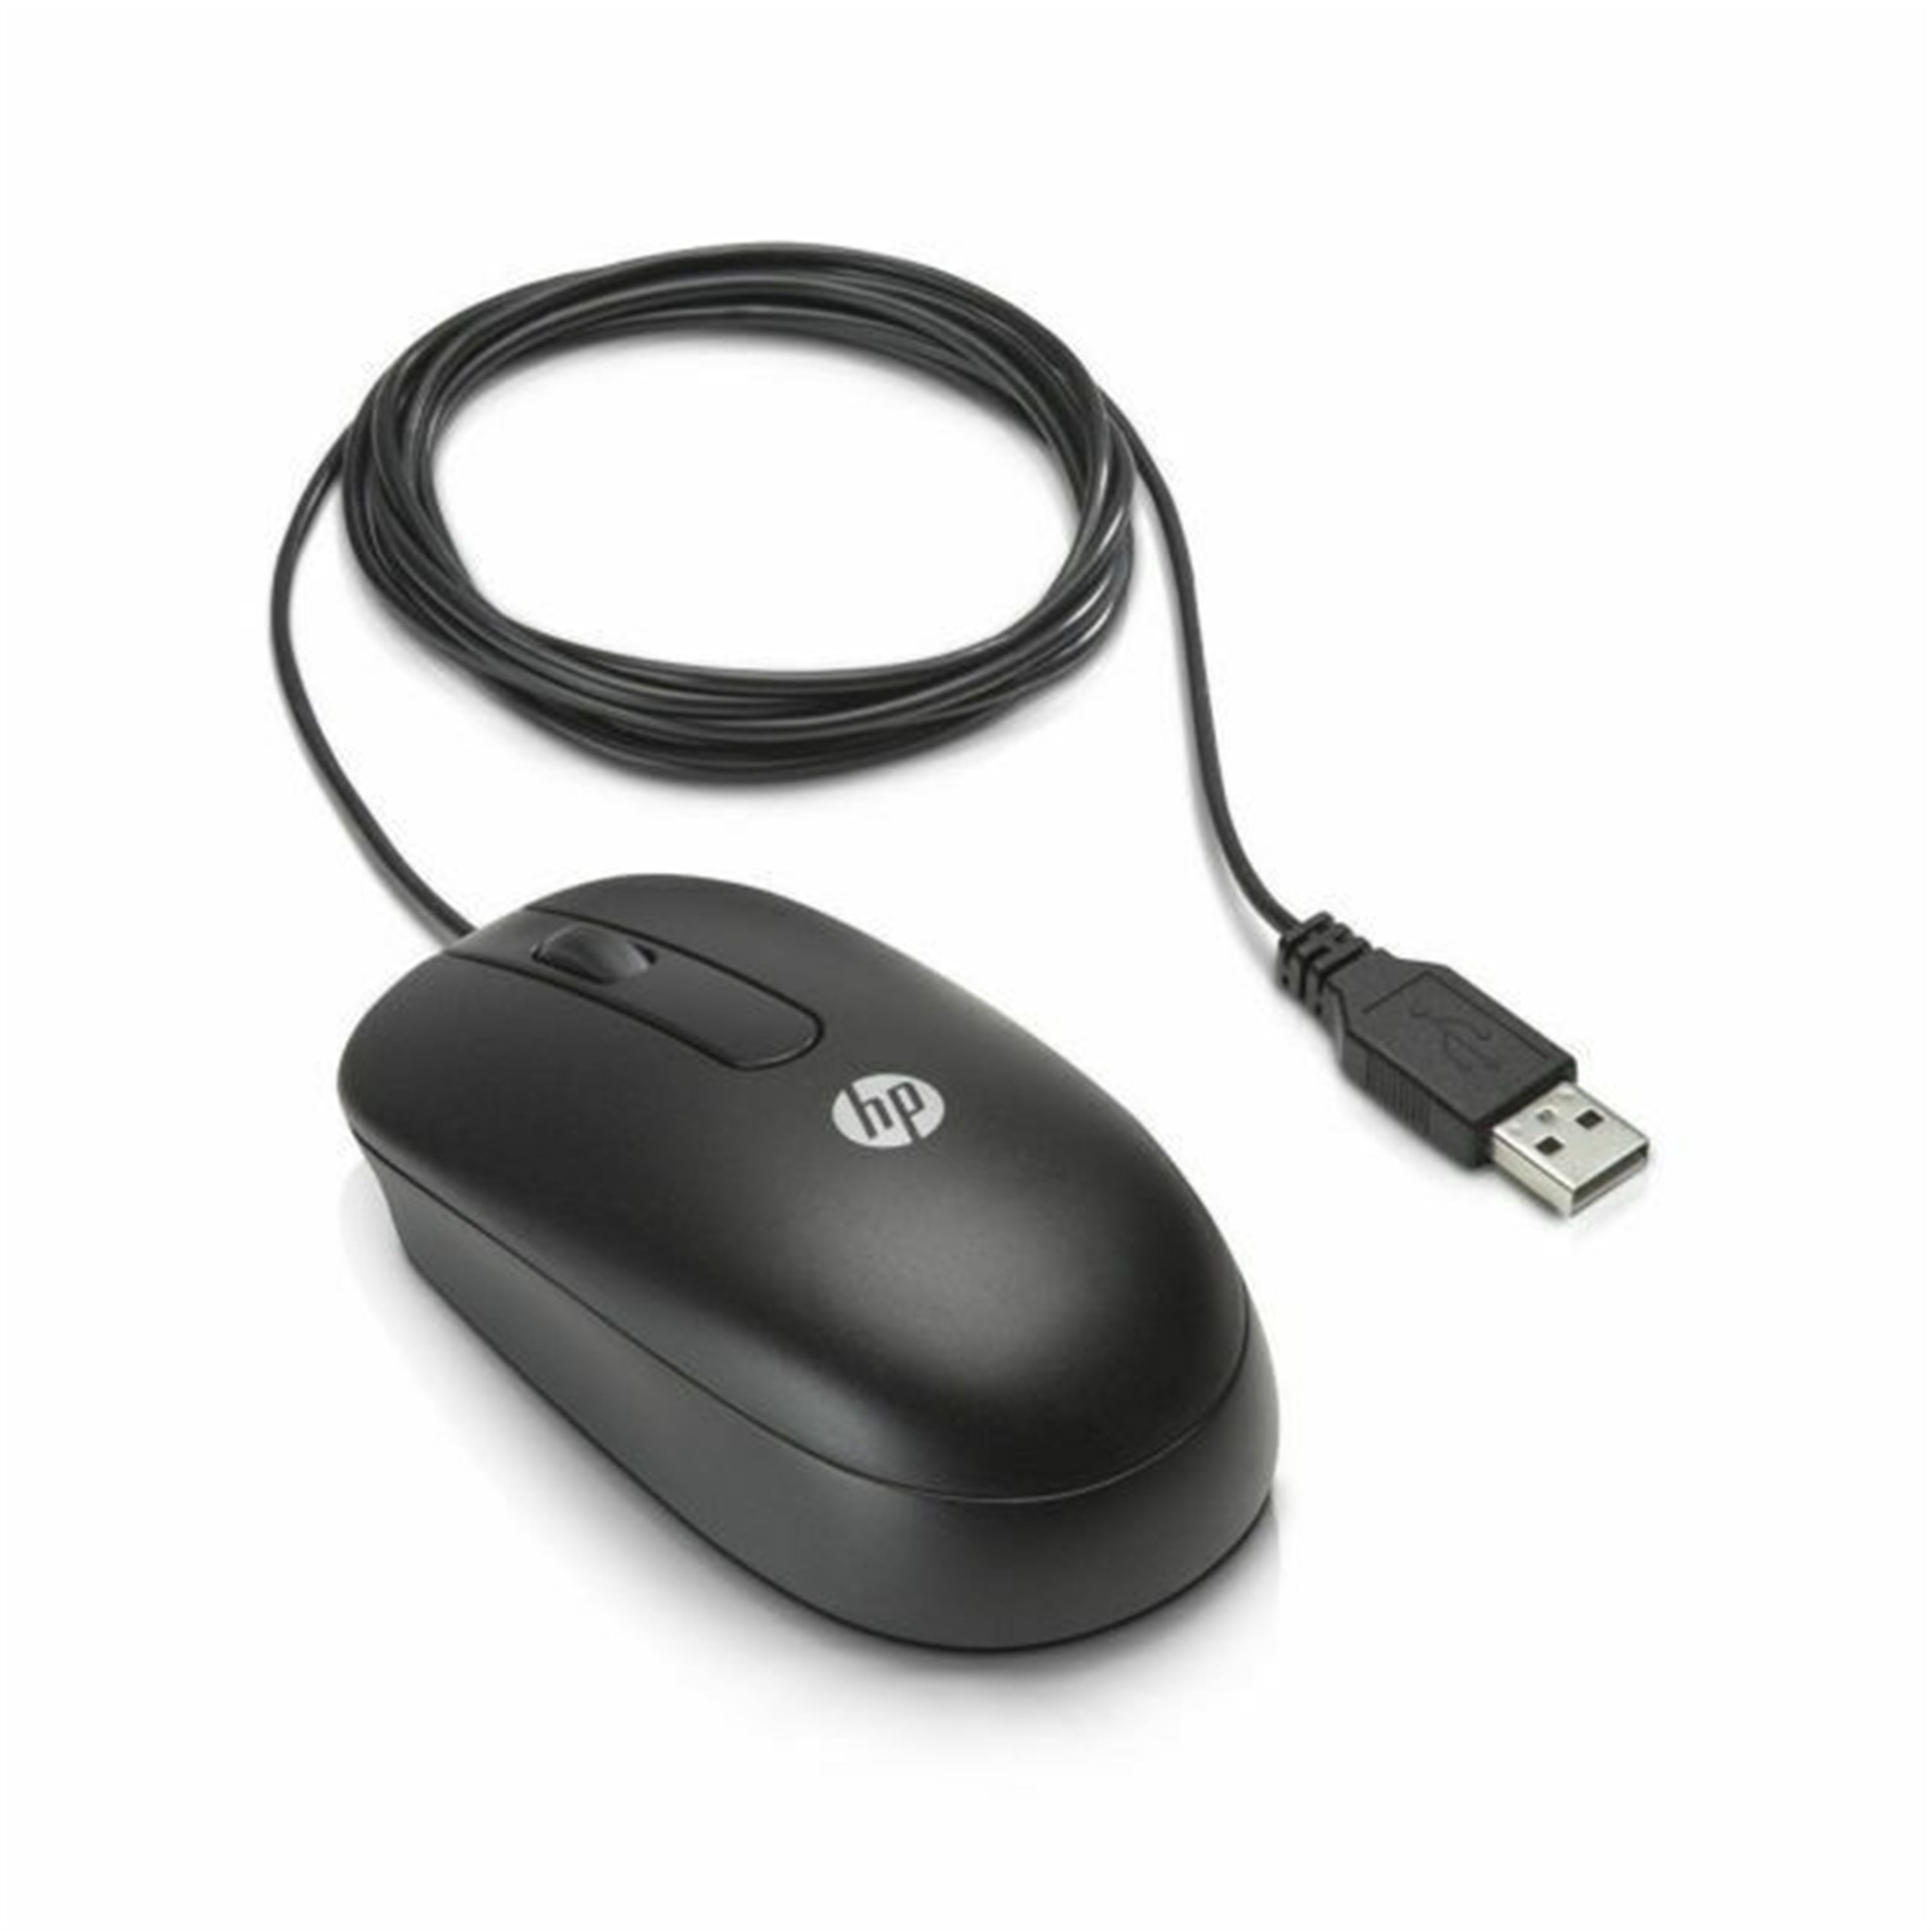 Logitech/Dexxa 5 Buttons PS/2 Optical Mouse,New,Free Shipping! 